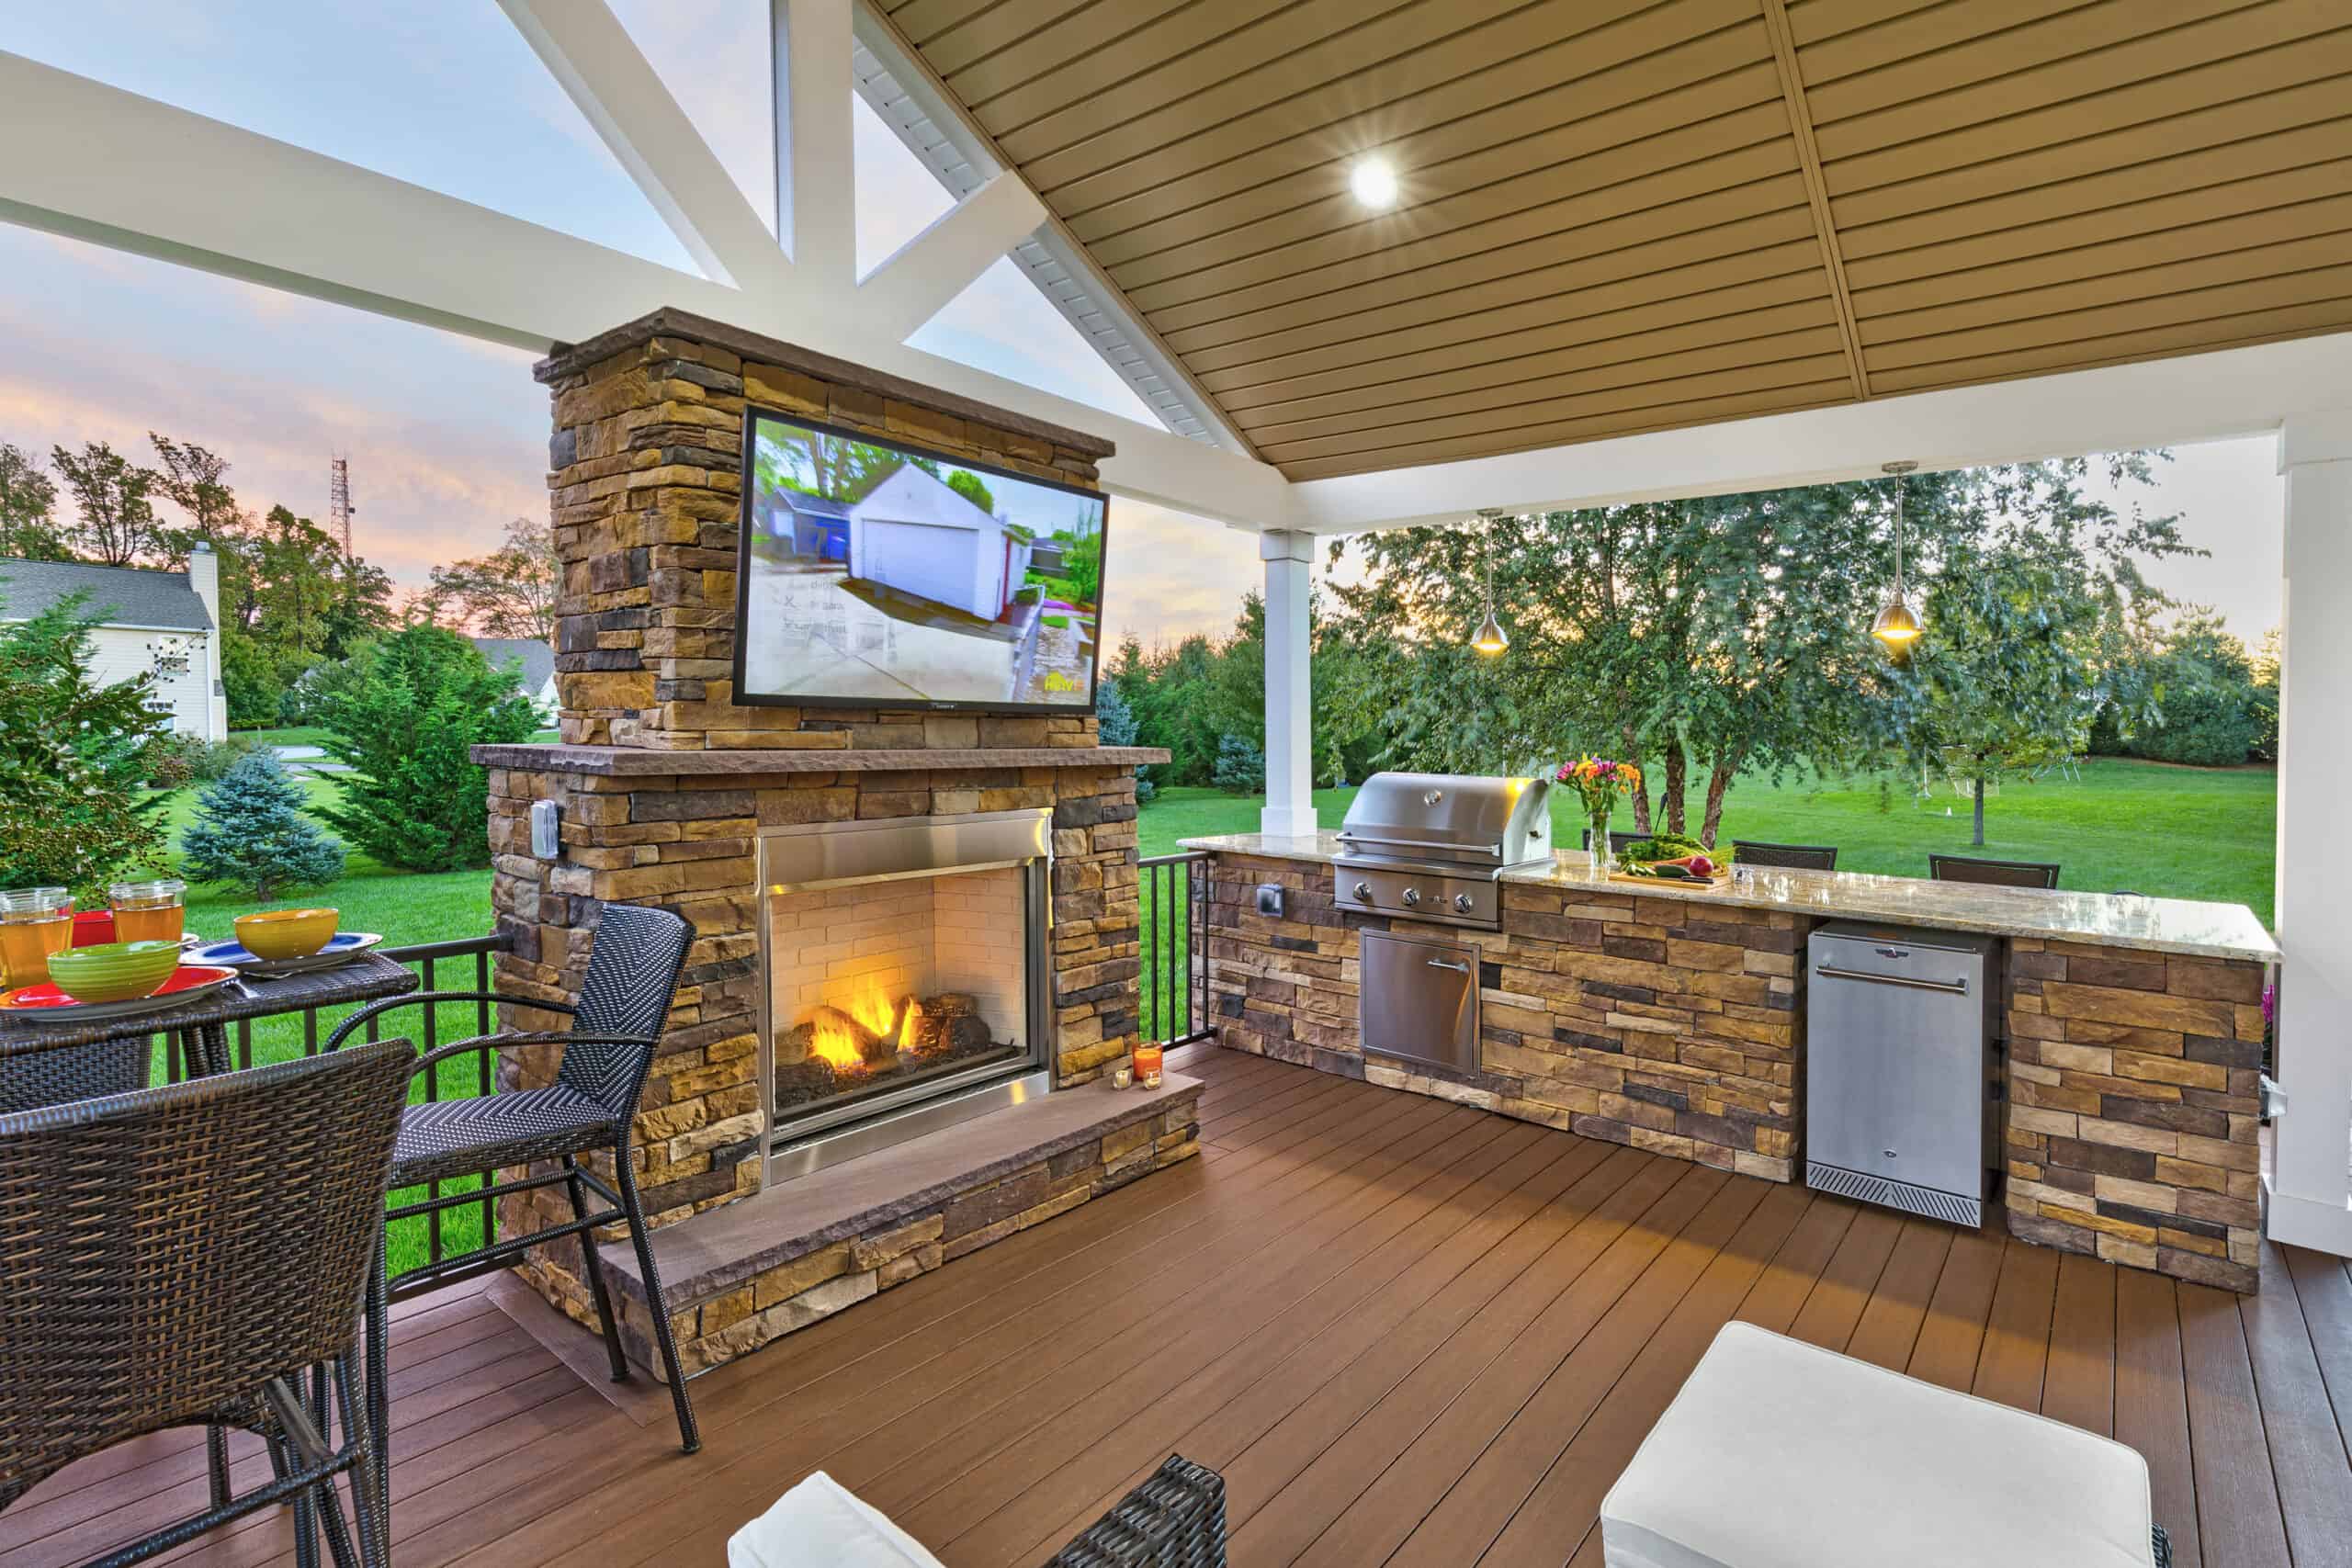  outdoor kitchen and fireplace designs